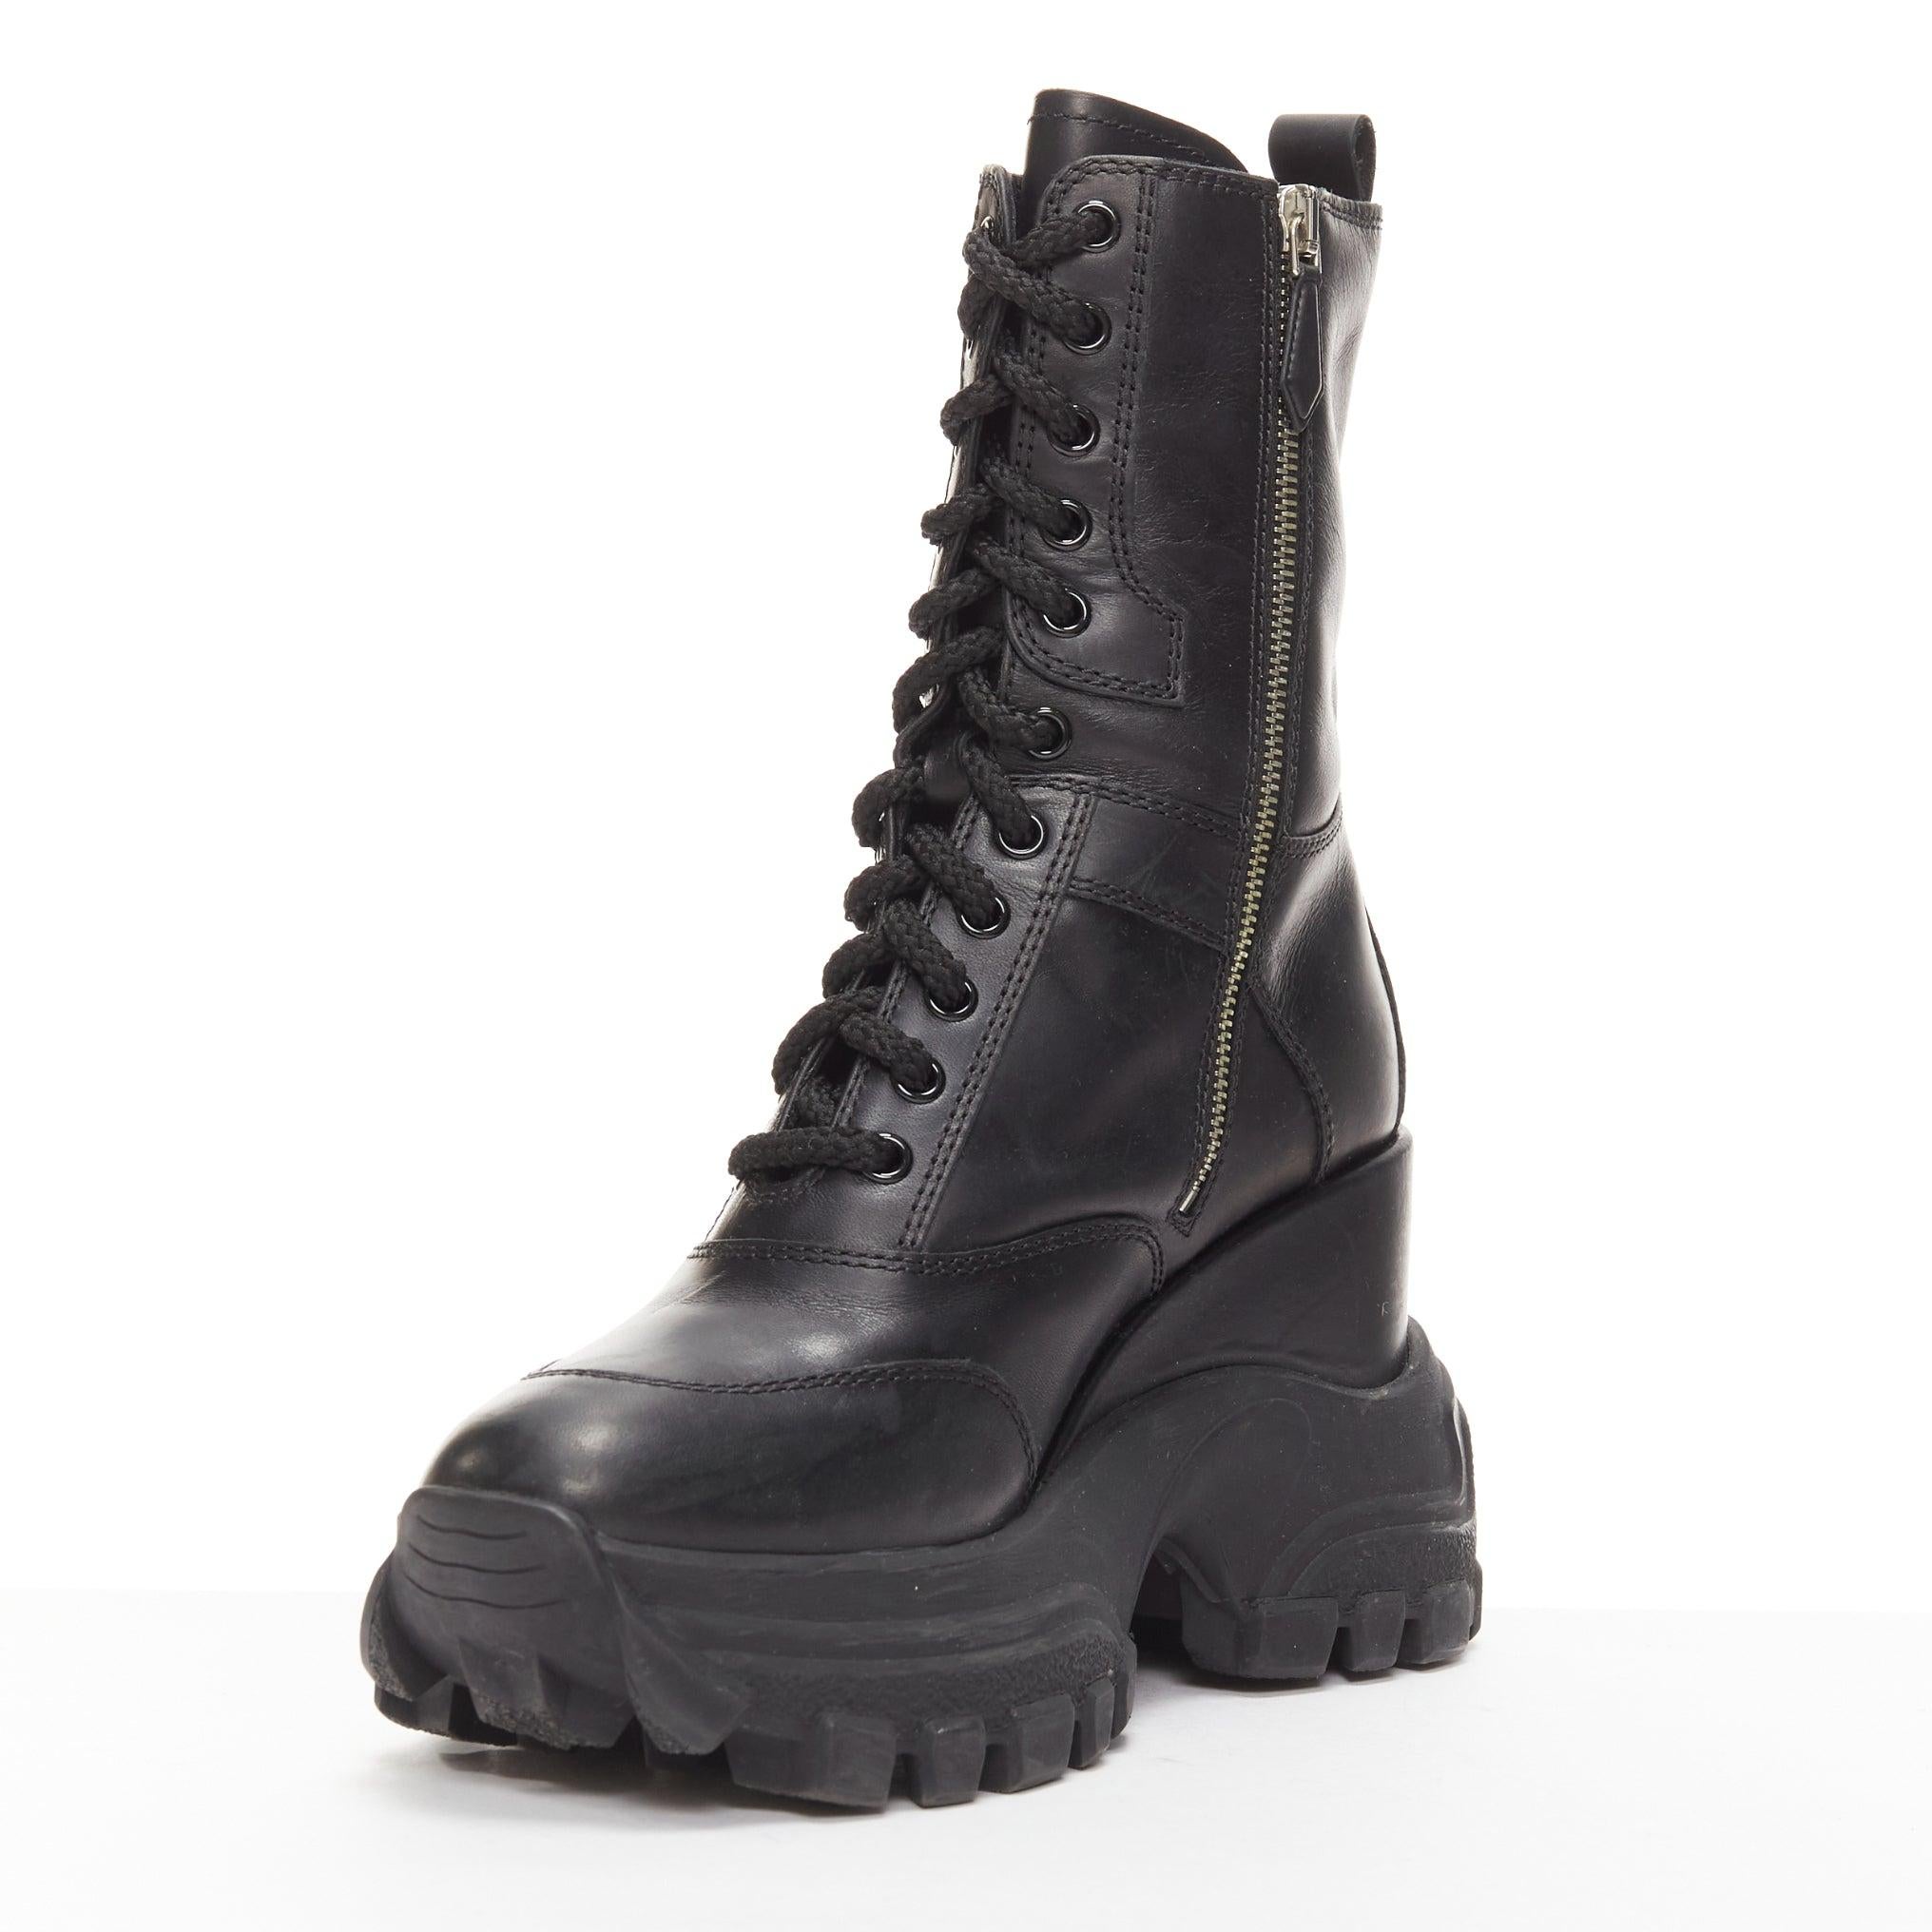 Women's MIU MIU Runway black leather logo lace up chunky wedged military boots EU39 For Sale